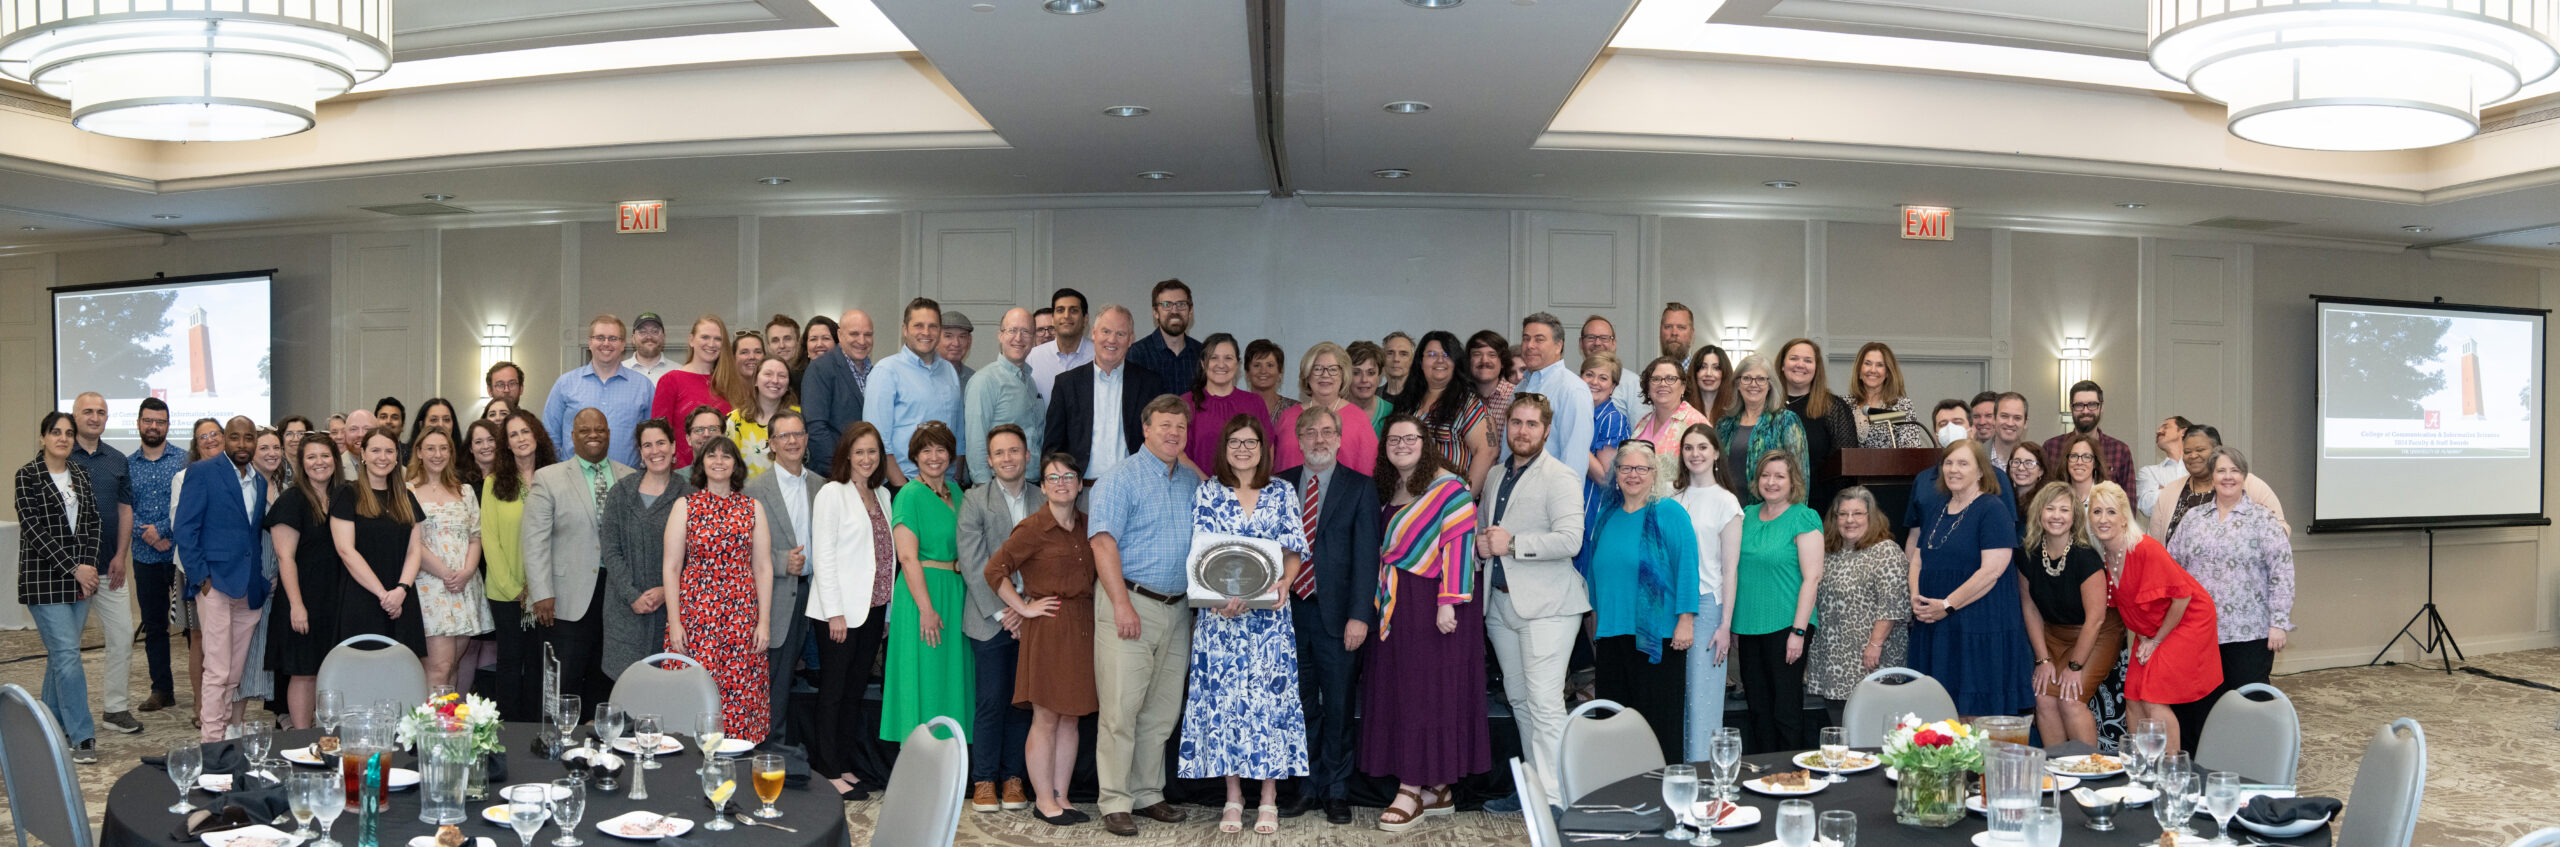 C&IS honors faculty and staff at awards luncheon